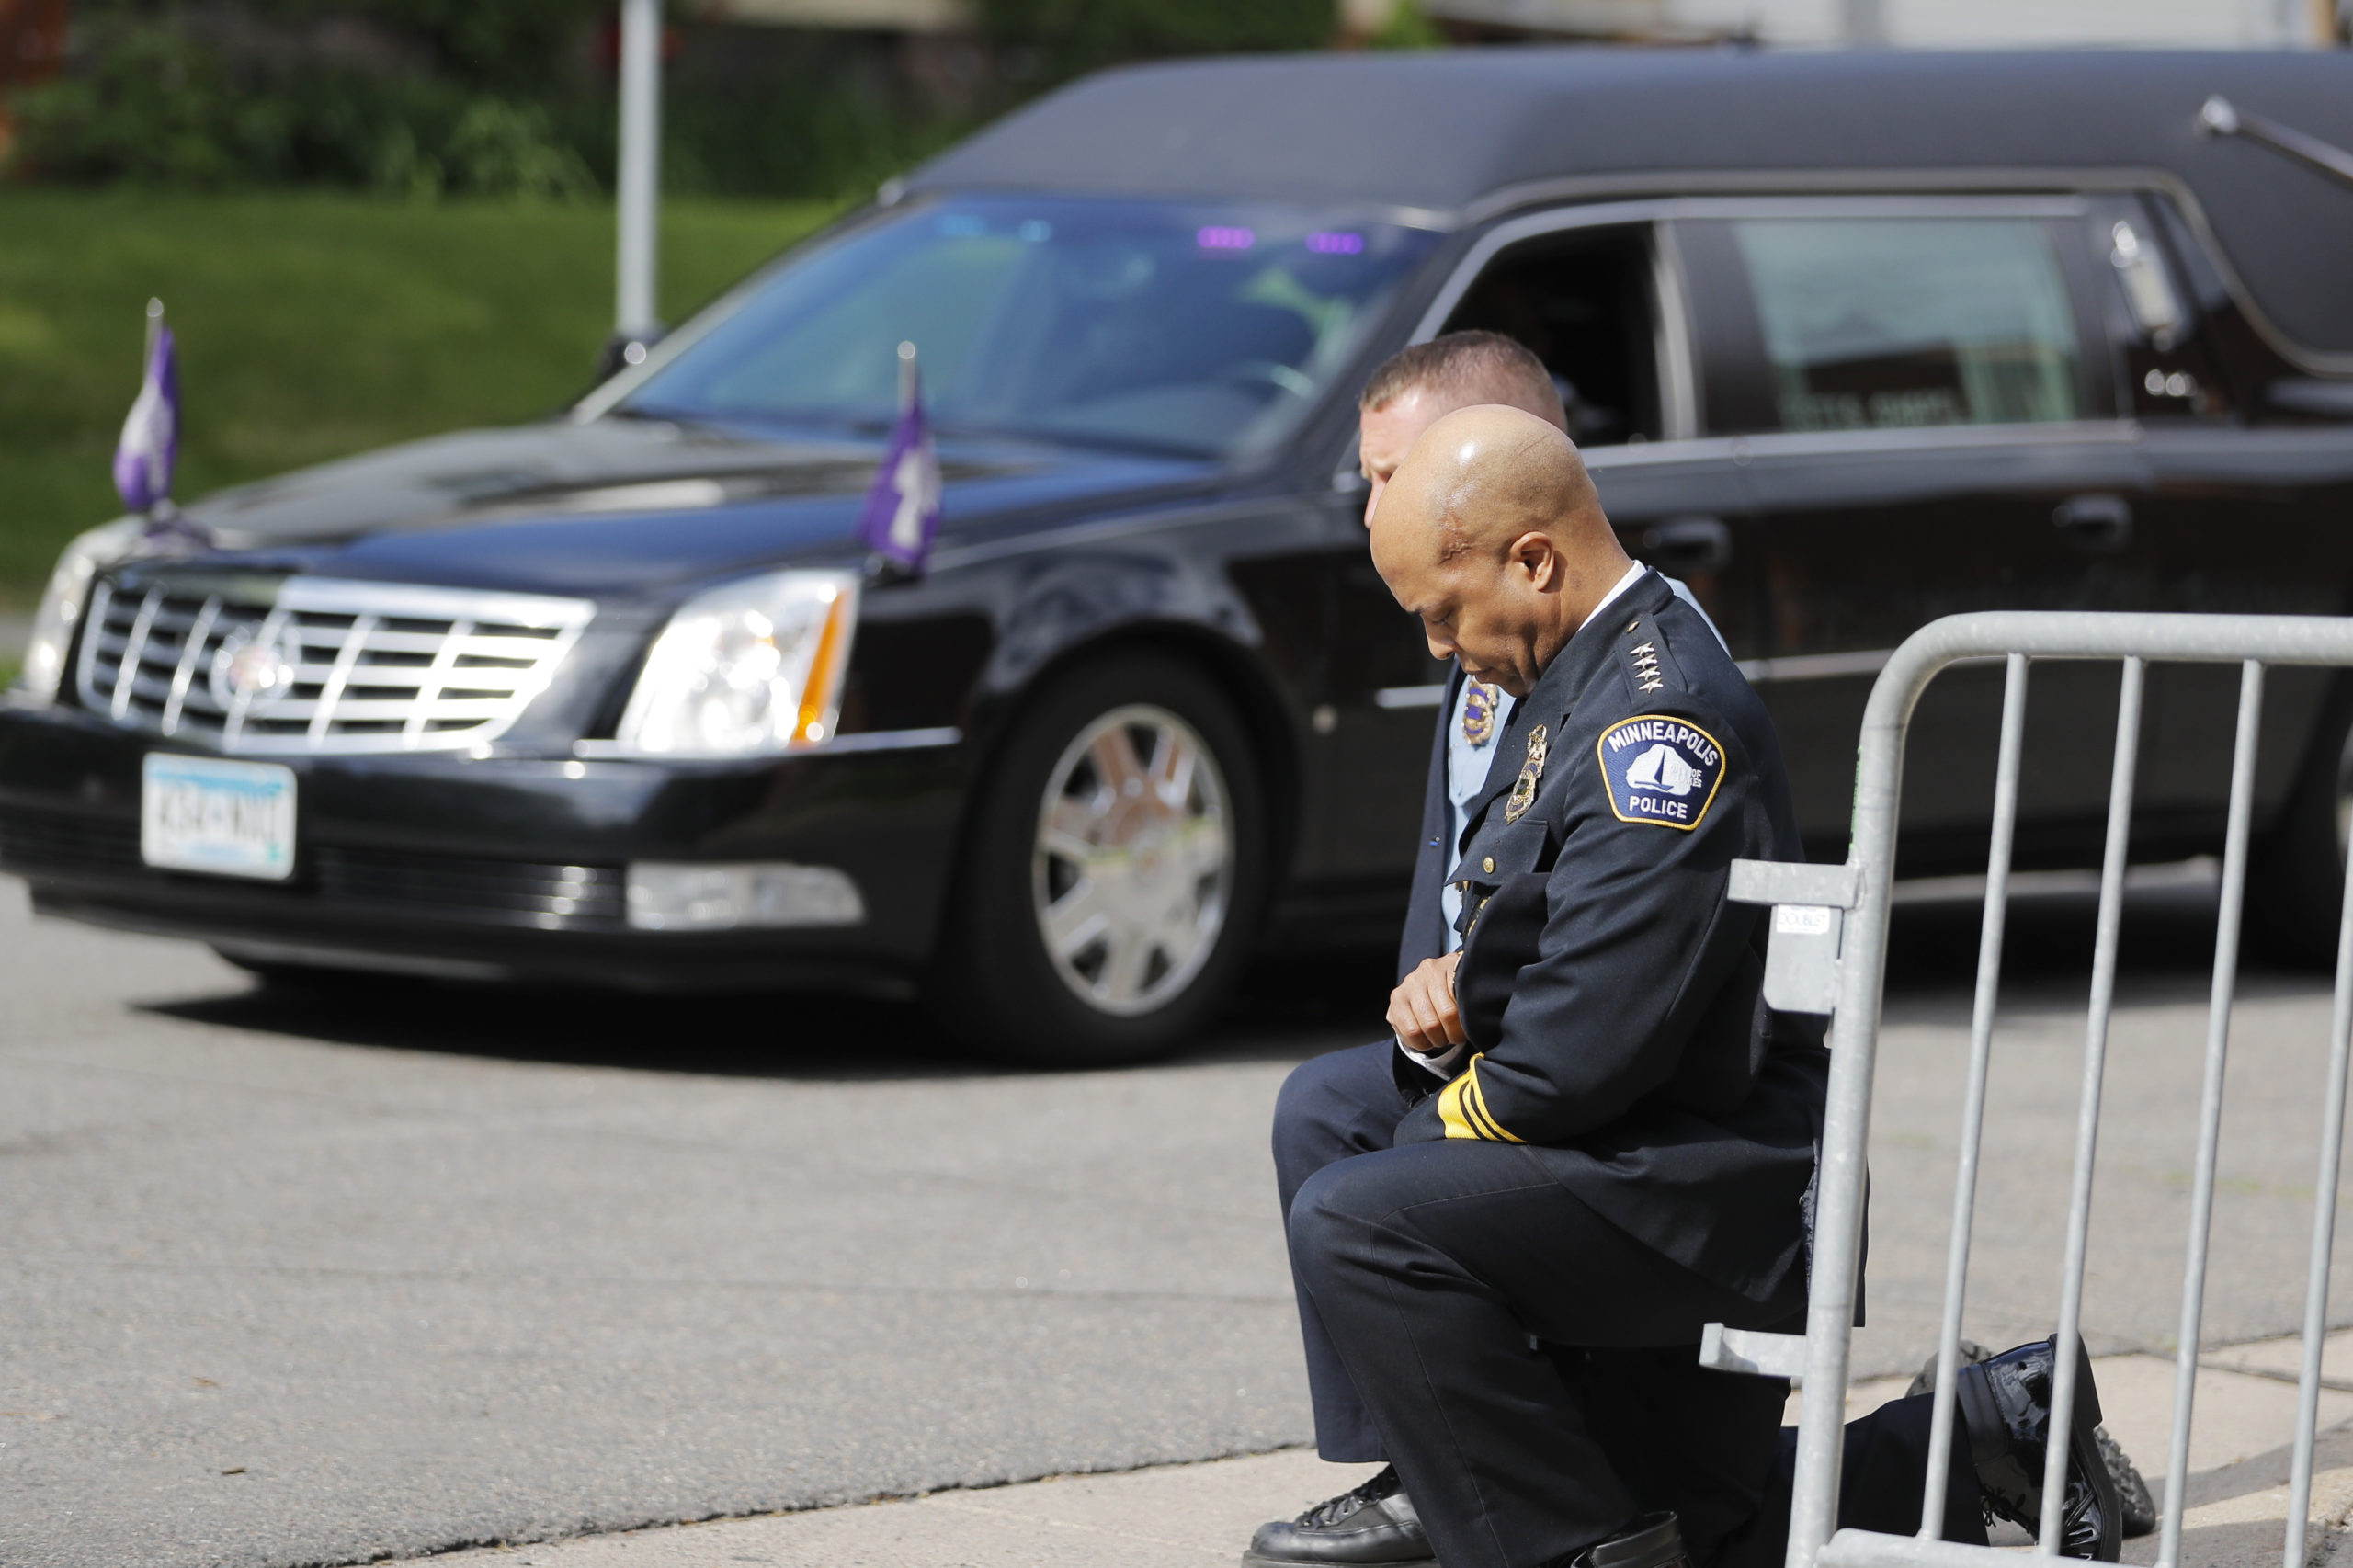 FILE - In this June 4, 2020, file photo, police officers including Minneapolis Police Chief Medaria Arradondo, foreground, take a knee as the body of George Floyd arrives before his memorial services in Minneapolis. In the two weeks since Floyd’s killing, police departments have banned chokeholds, Confederate monuments have fallen and officers have been arrested and charged. The moves come amid a massive, nationwide outcry against violence by police and racism. (AP Photo/Julio Cortez, File)